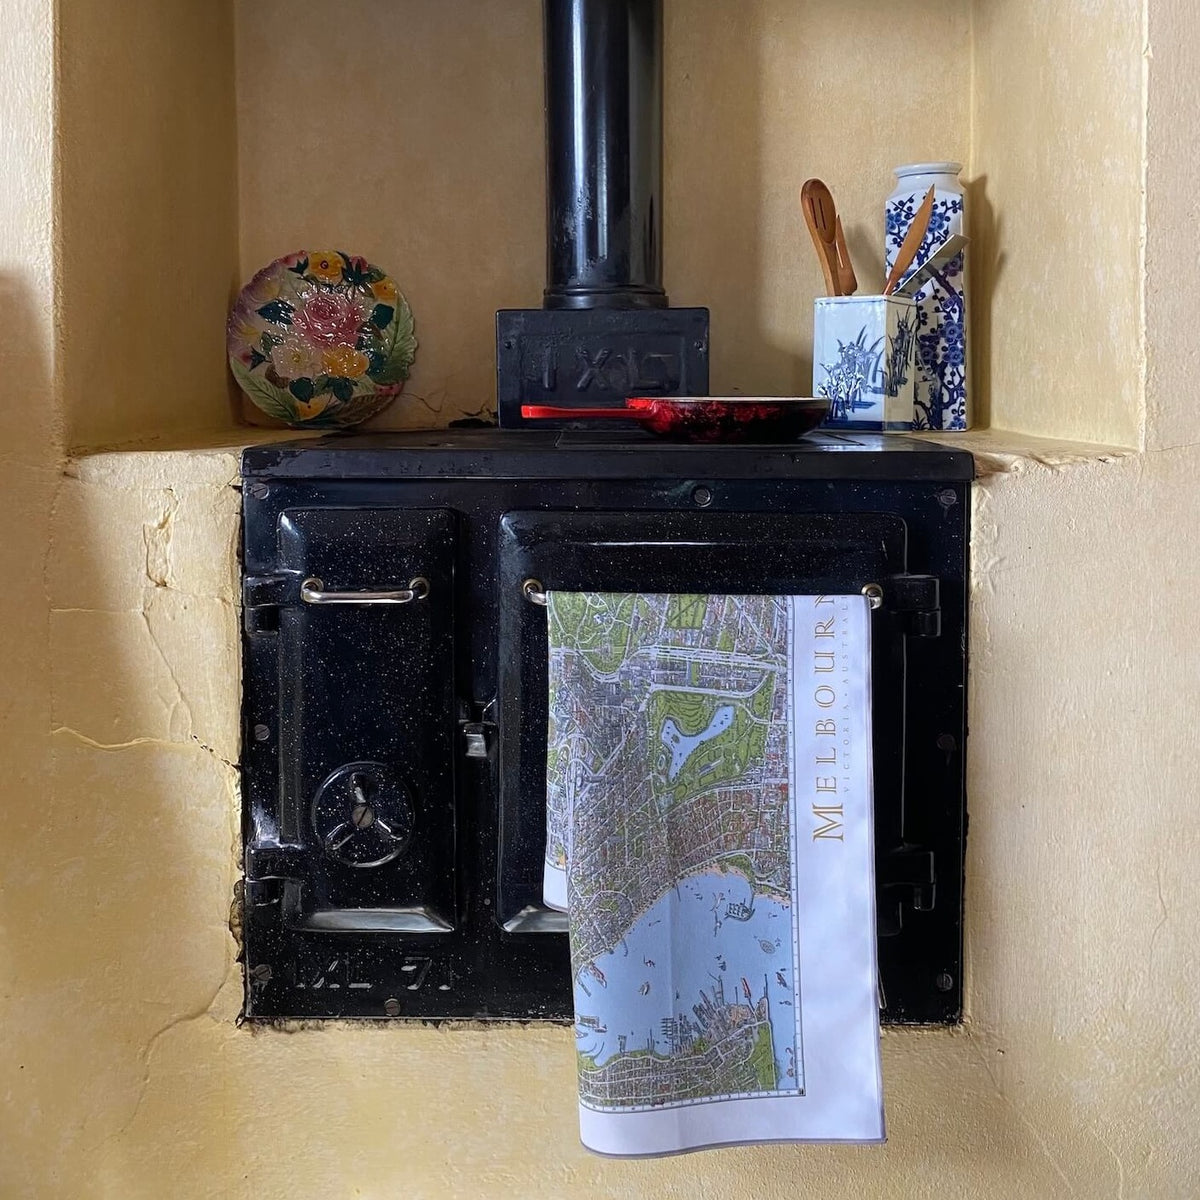 The Melbourne Map Tea Towel draping over the handle of an antique wood burning oven. There is a cast iron skillet on the stove with utensils pot and decorative plate either side. 